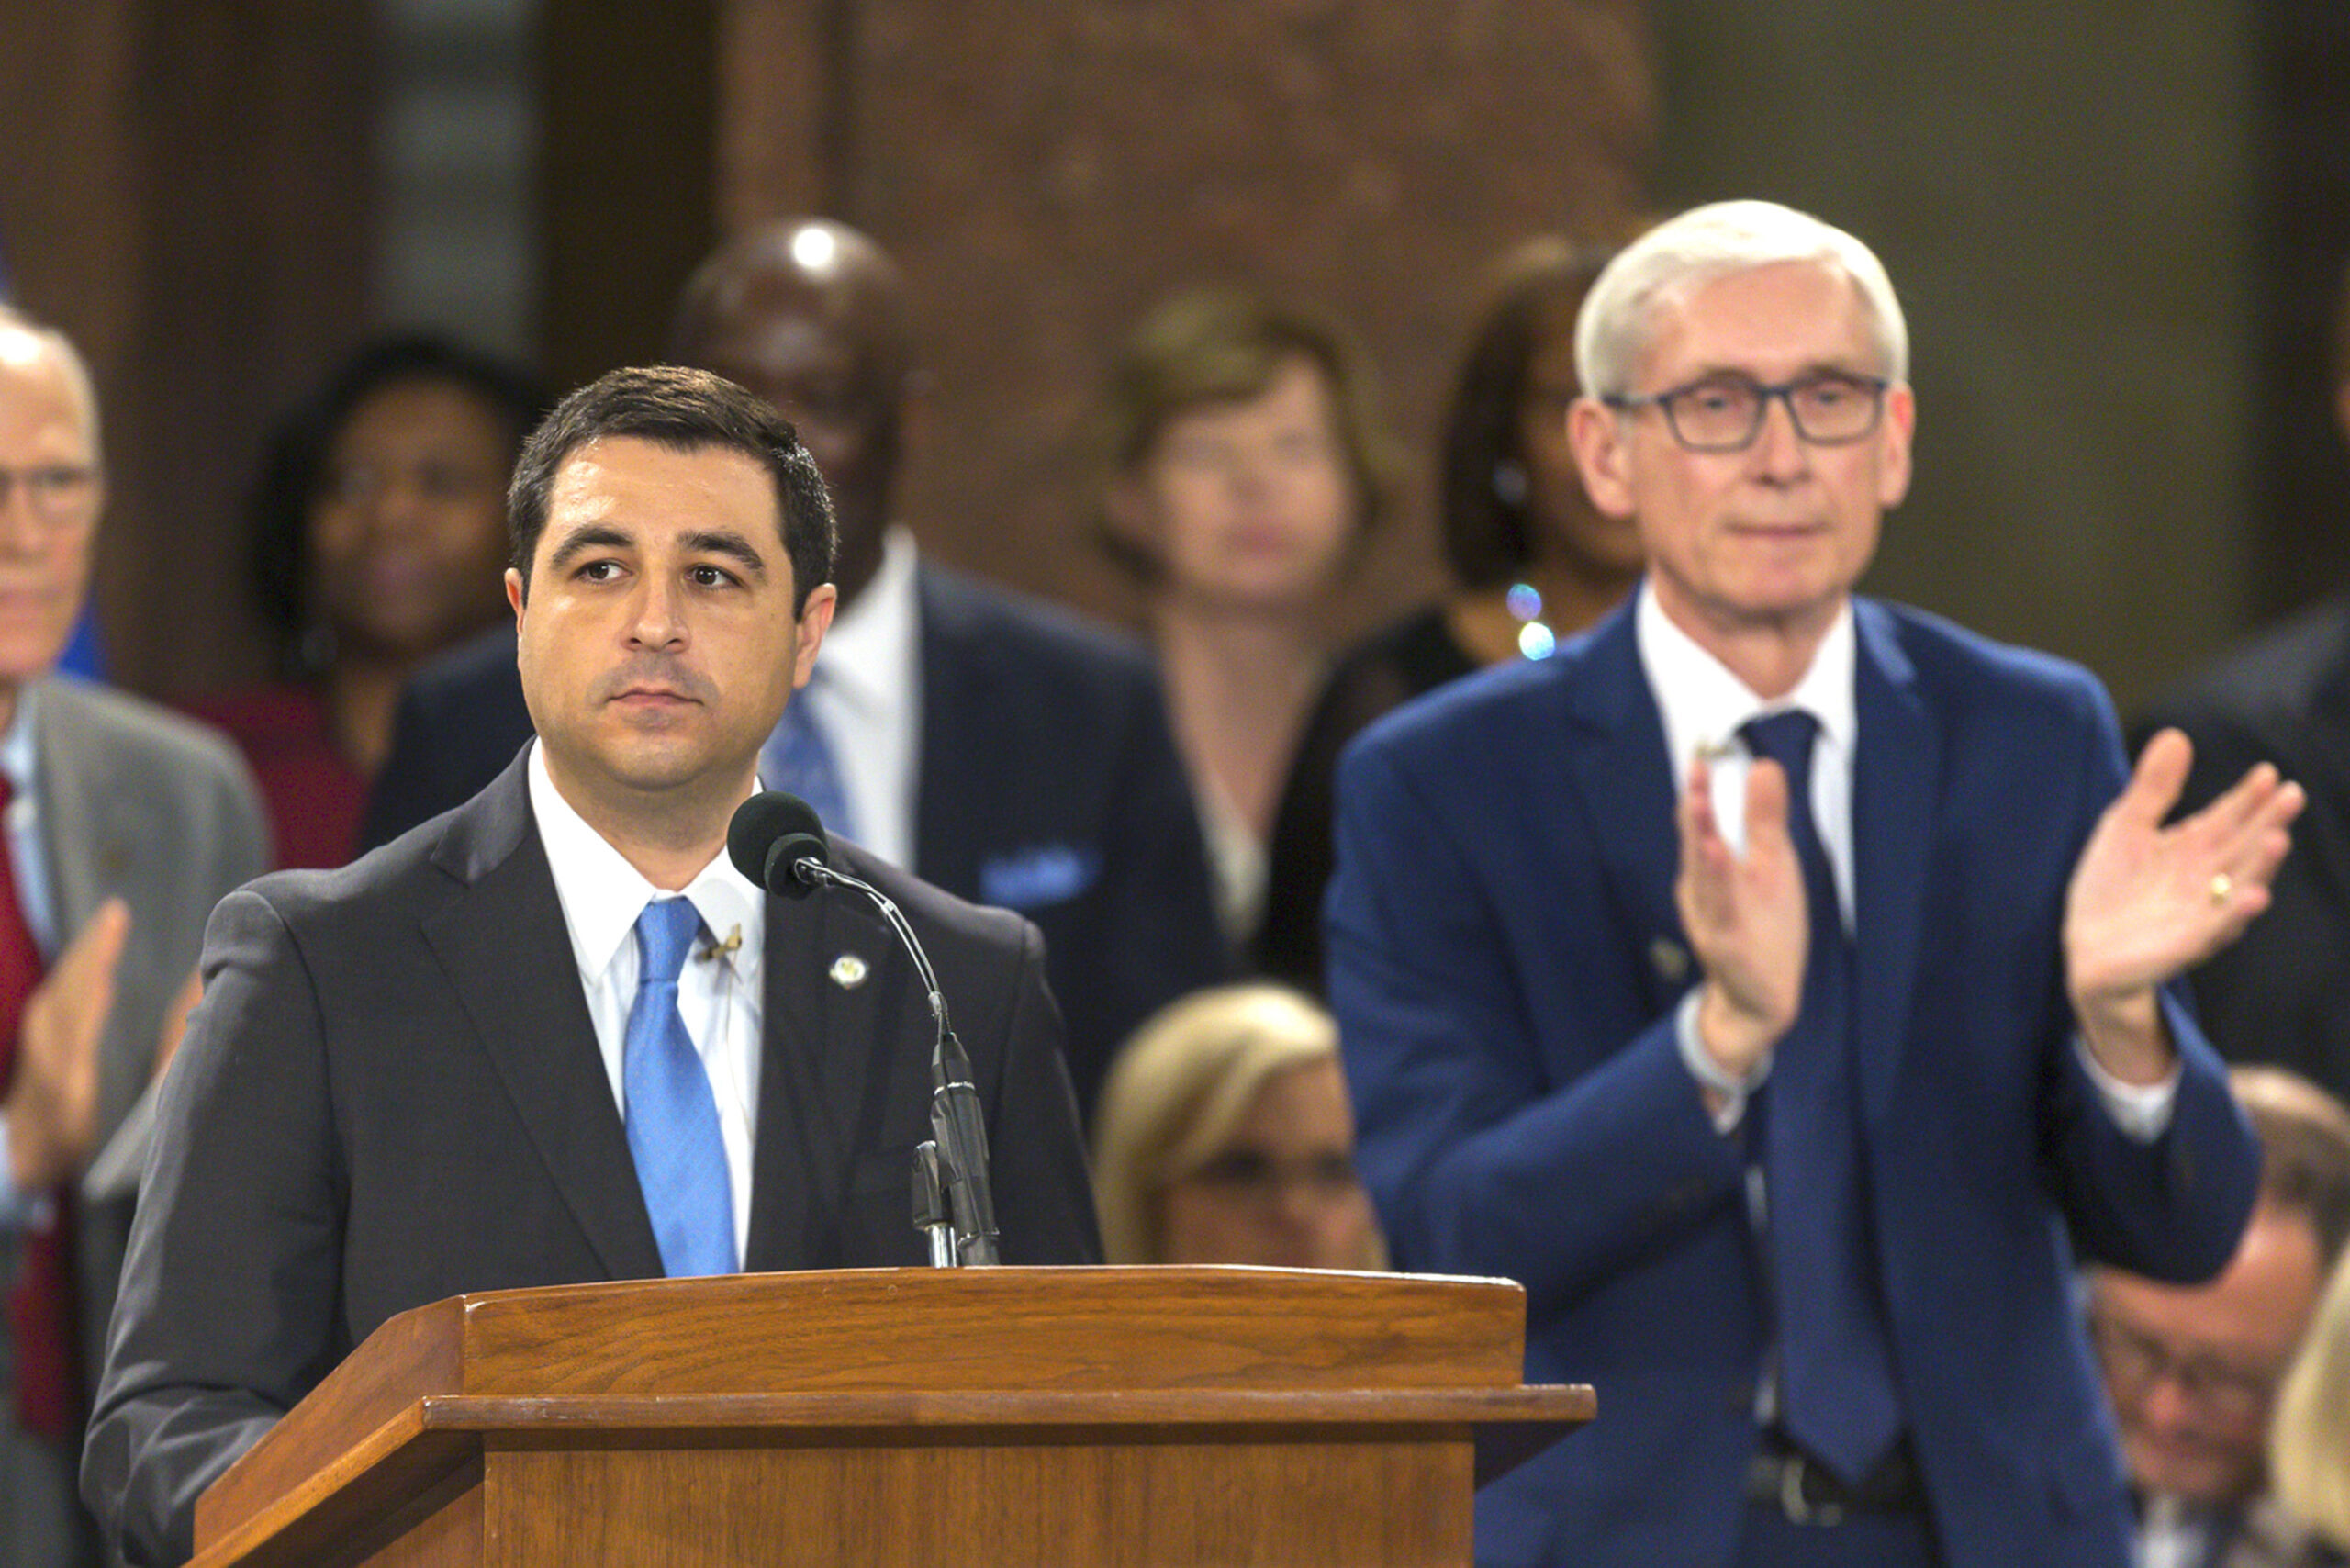 Attorney General Josh Kaul and Governor Tony Evers